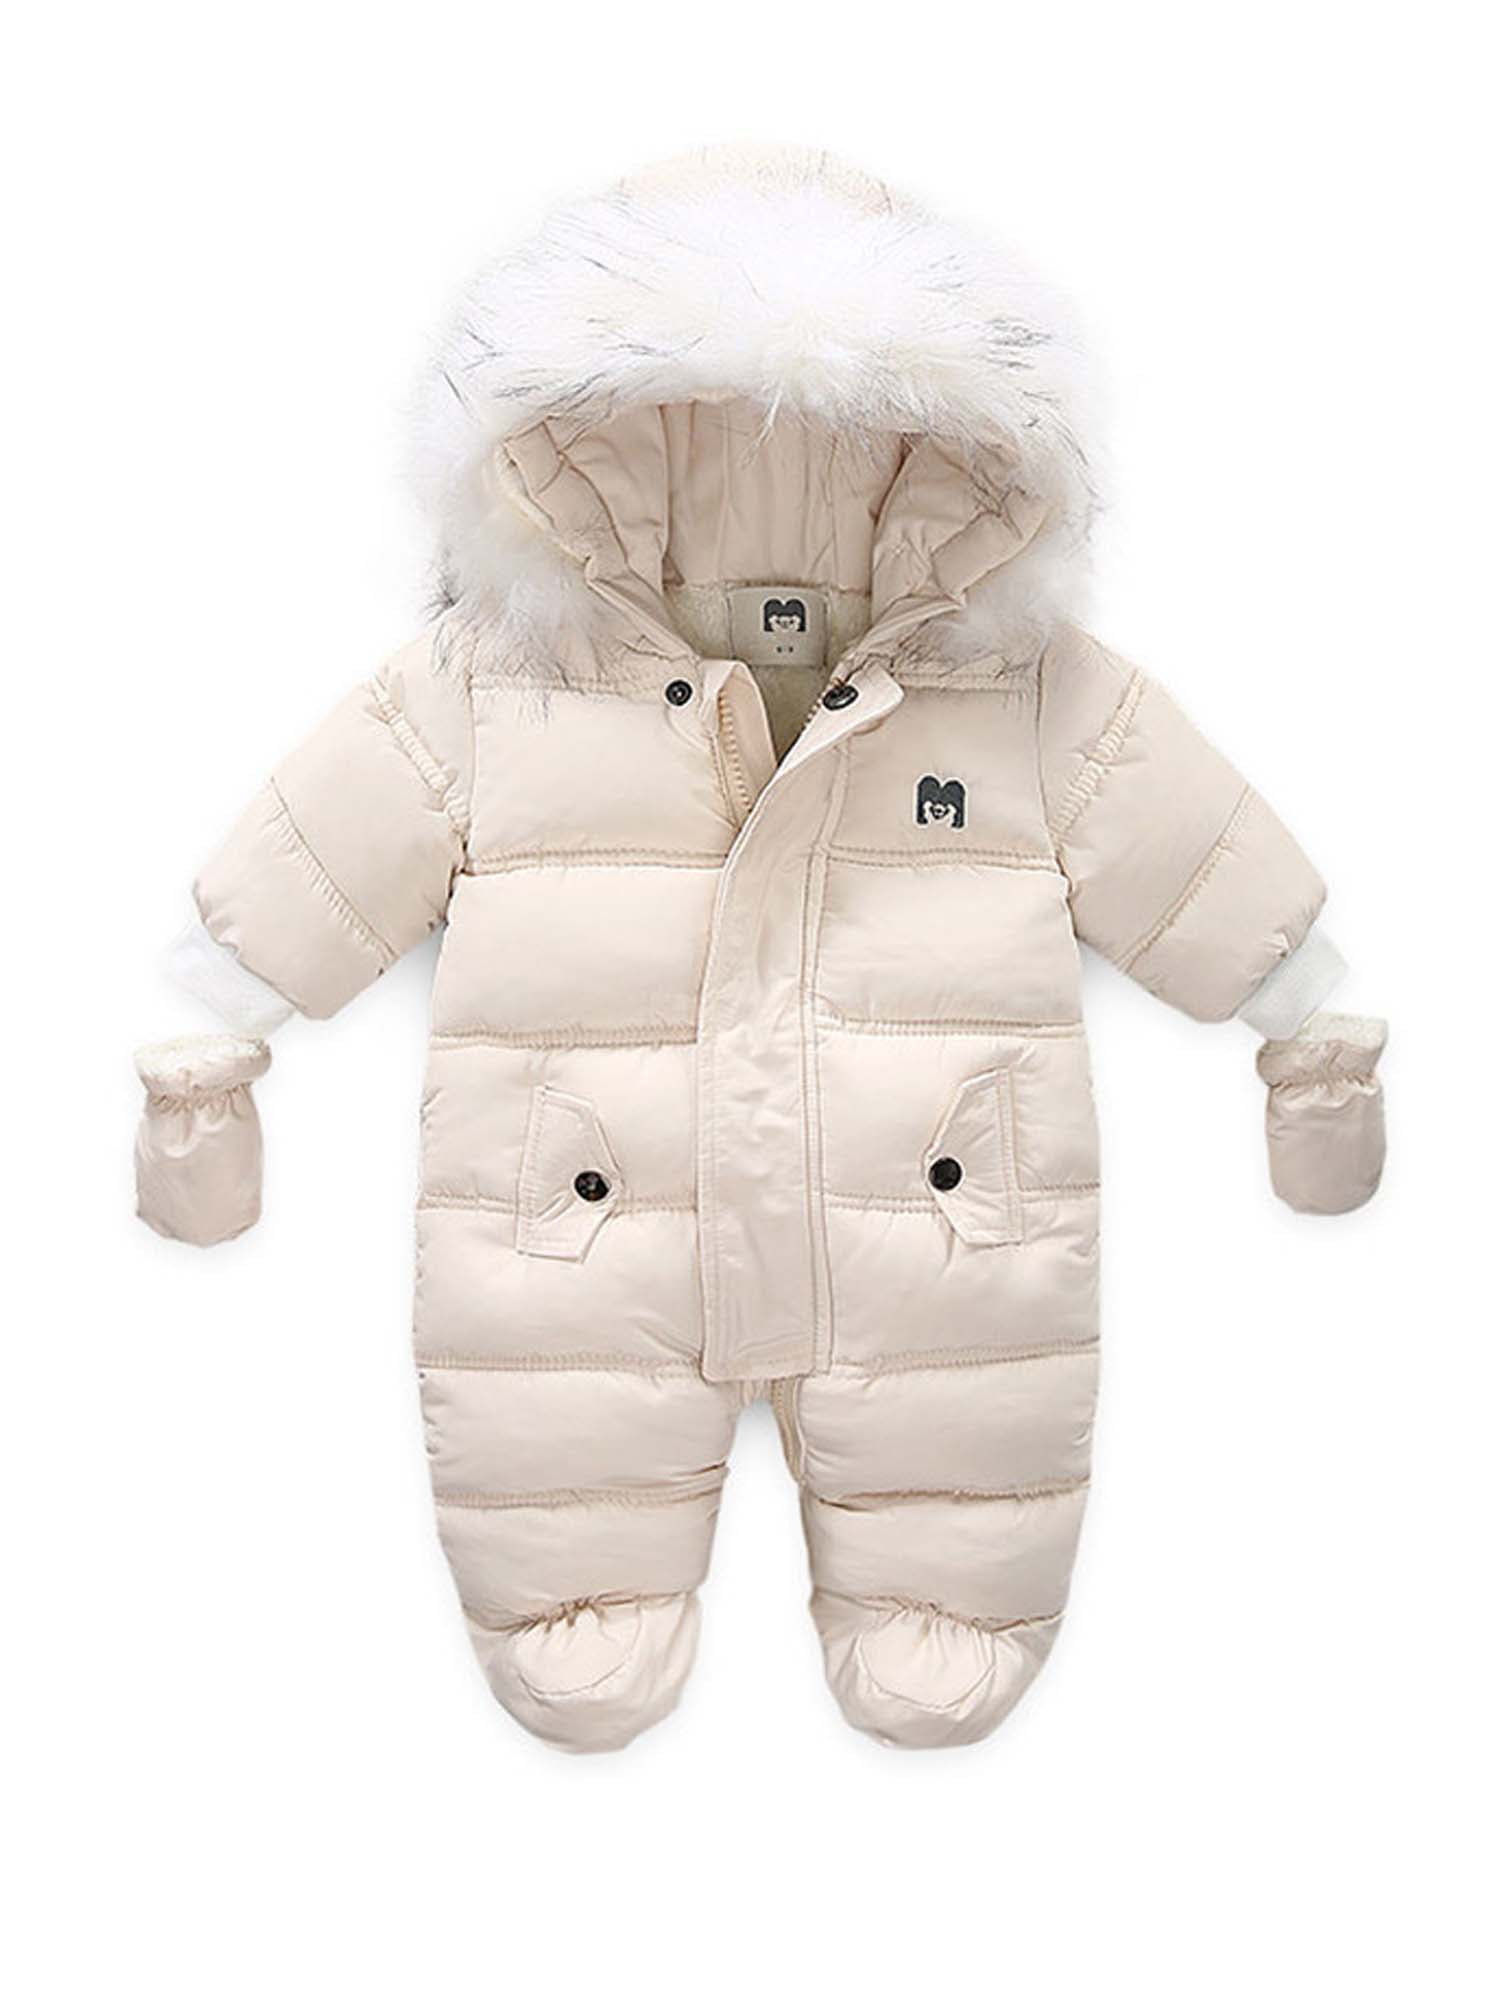 BABY GIRLS PADDED SNOWSUIT ALL IN ONE OUTDOOR COAT MITTS FEET THICK PRAMSUIT NEW 